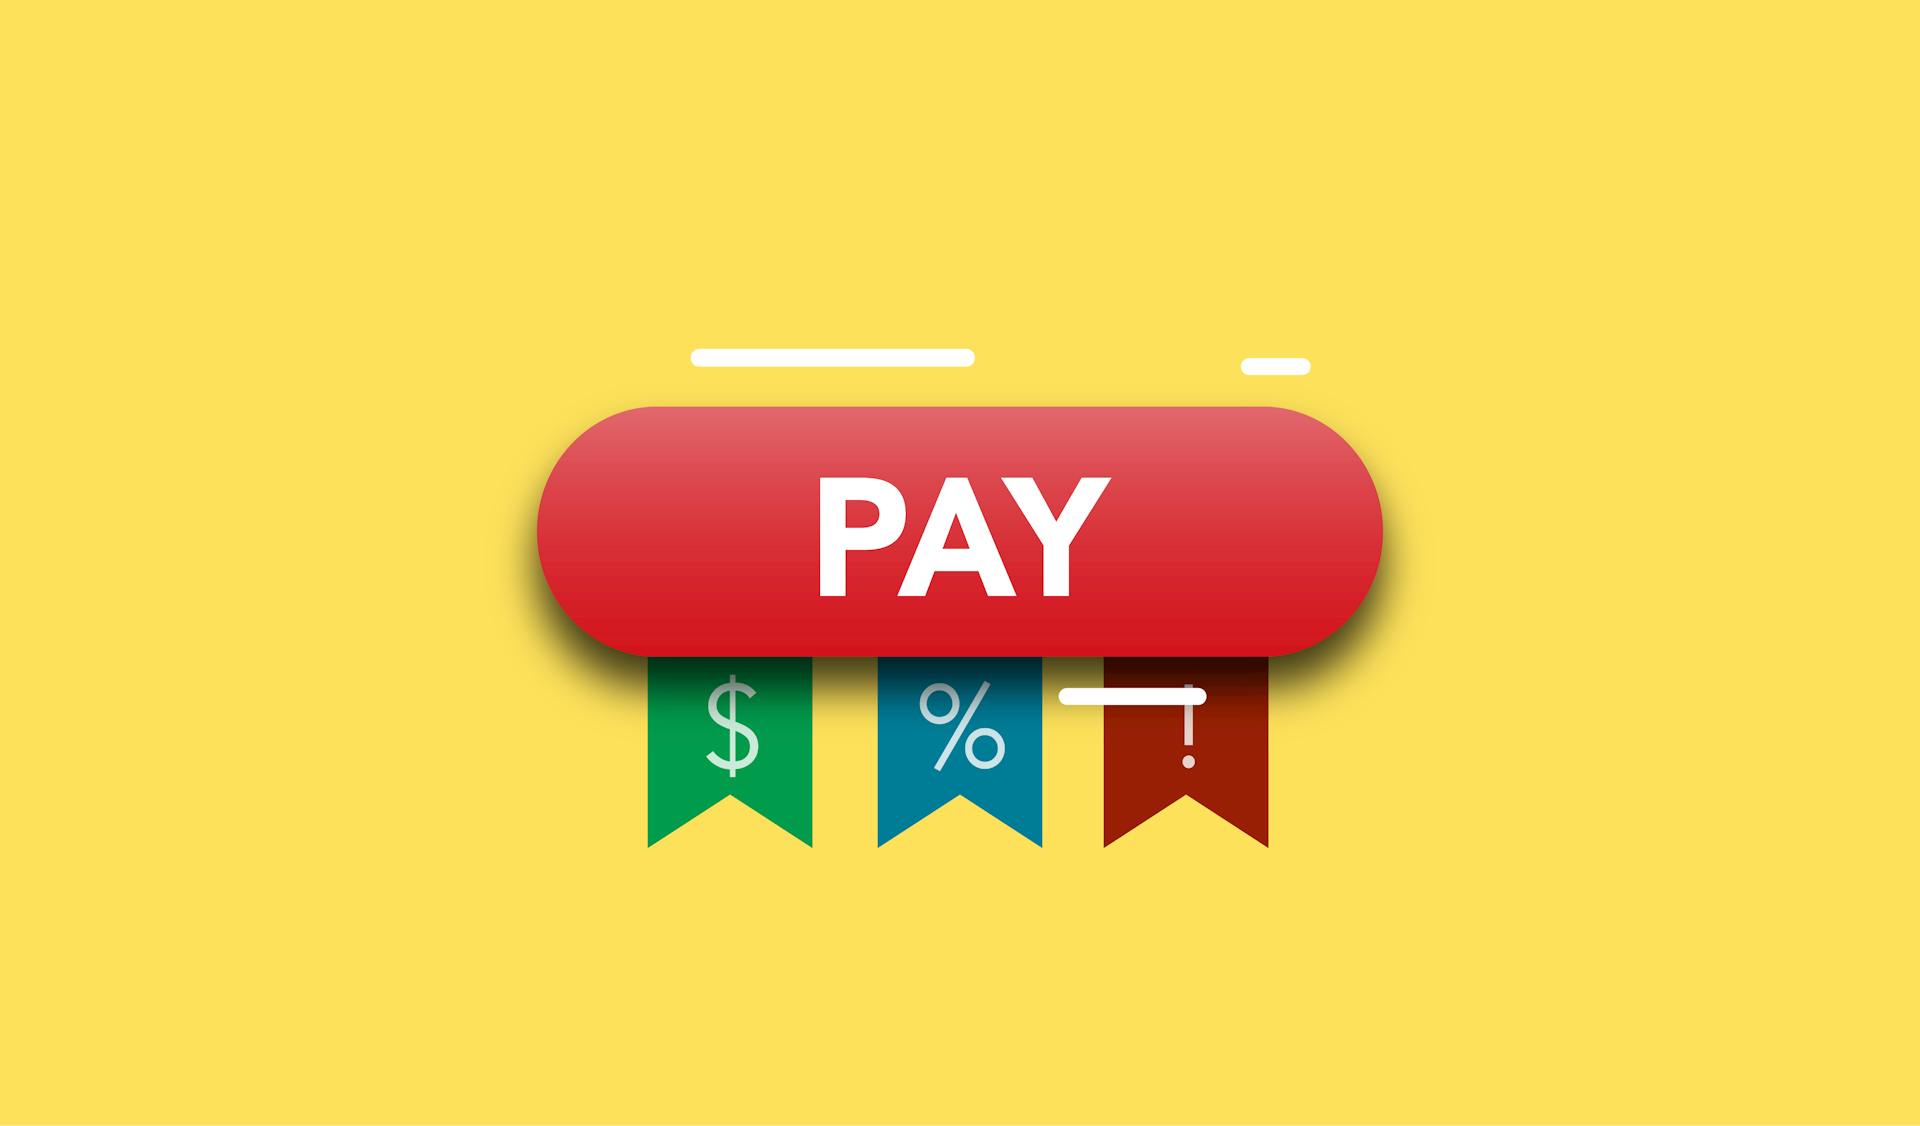 Simple illustration showing financial concept of payments with dollars interests and information on yellow background